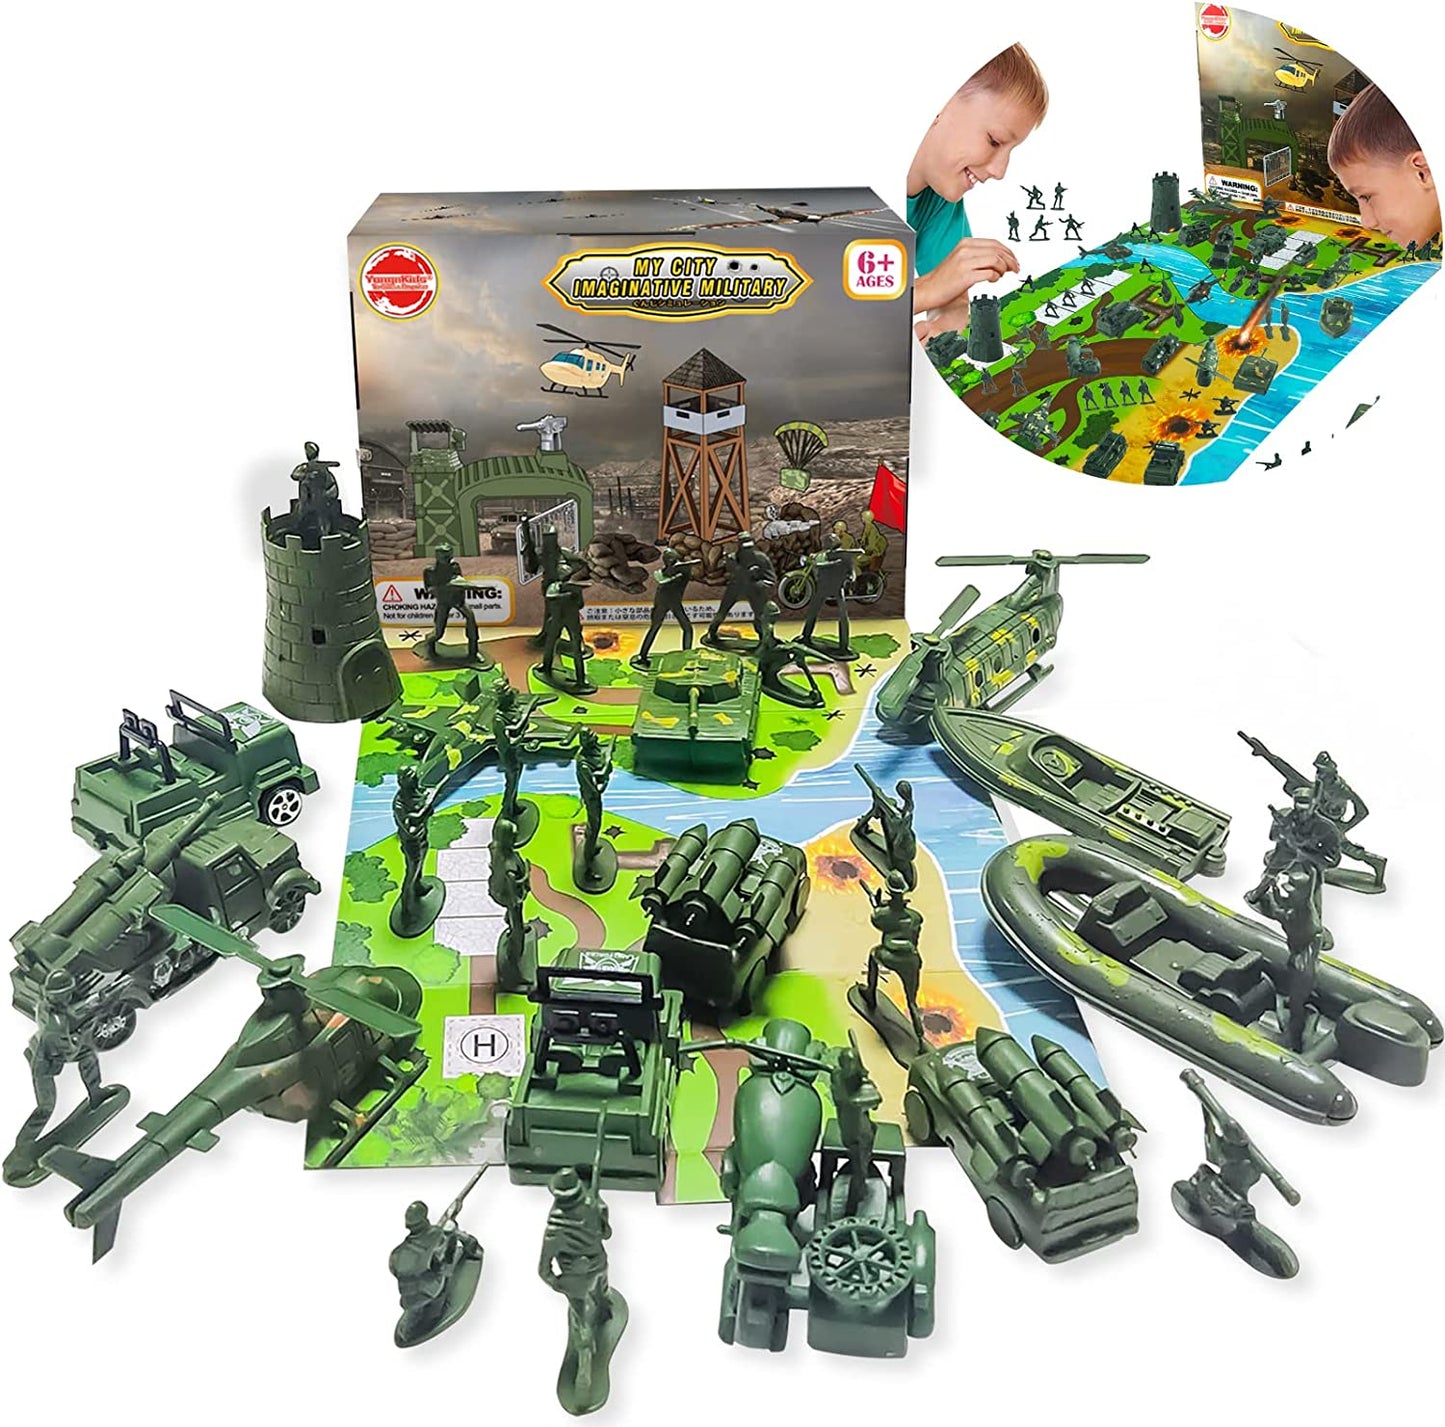 Toys for Boys|Army Men Toys for Boys|Army Men|Army Toys-46 Pcs Army Scene Box-Mini Action Figure Play Set with Soldiers, Vehicles ,Tanks , Aircrafts & Boats (Army)